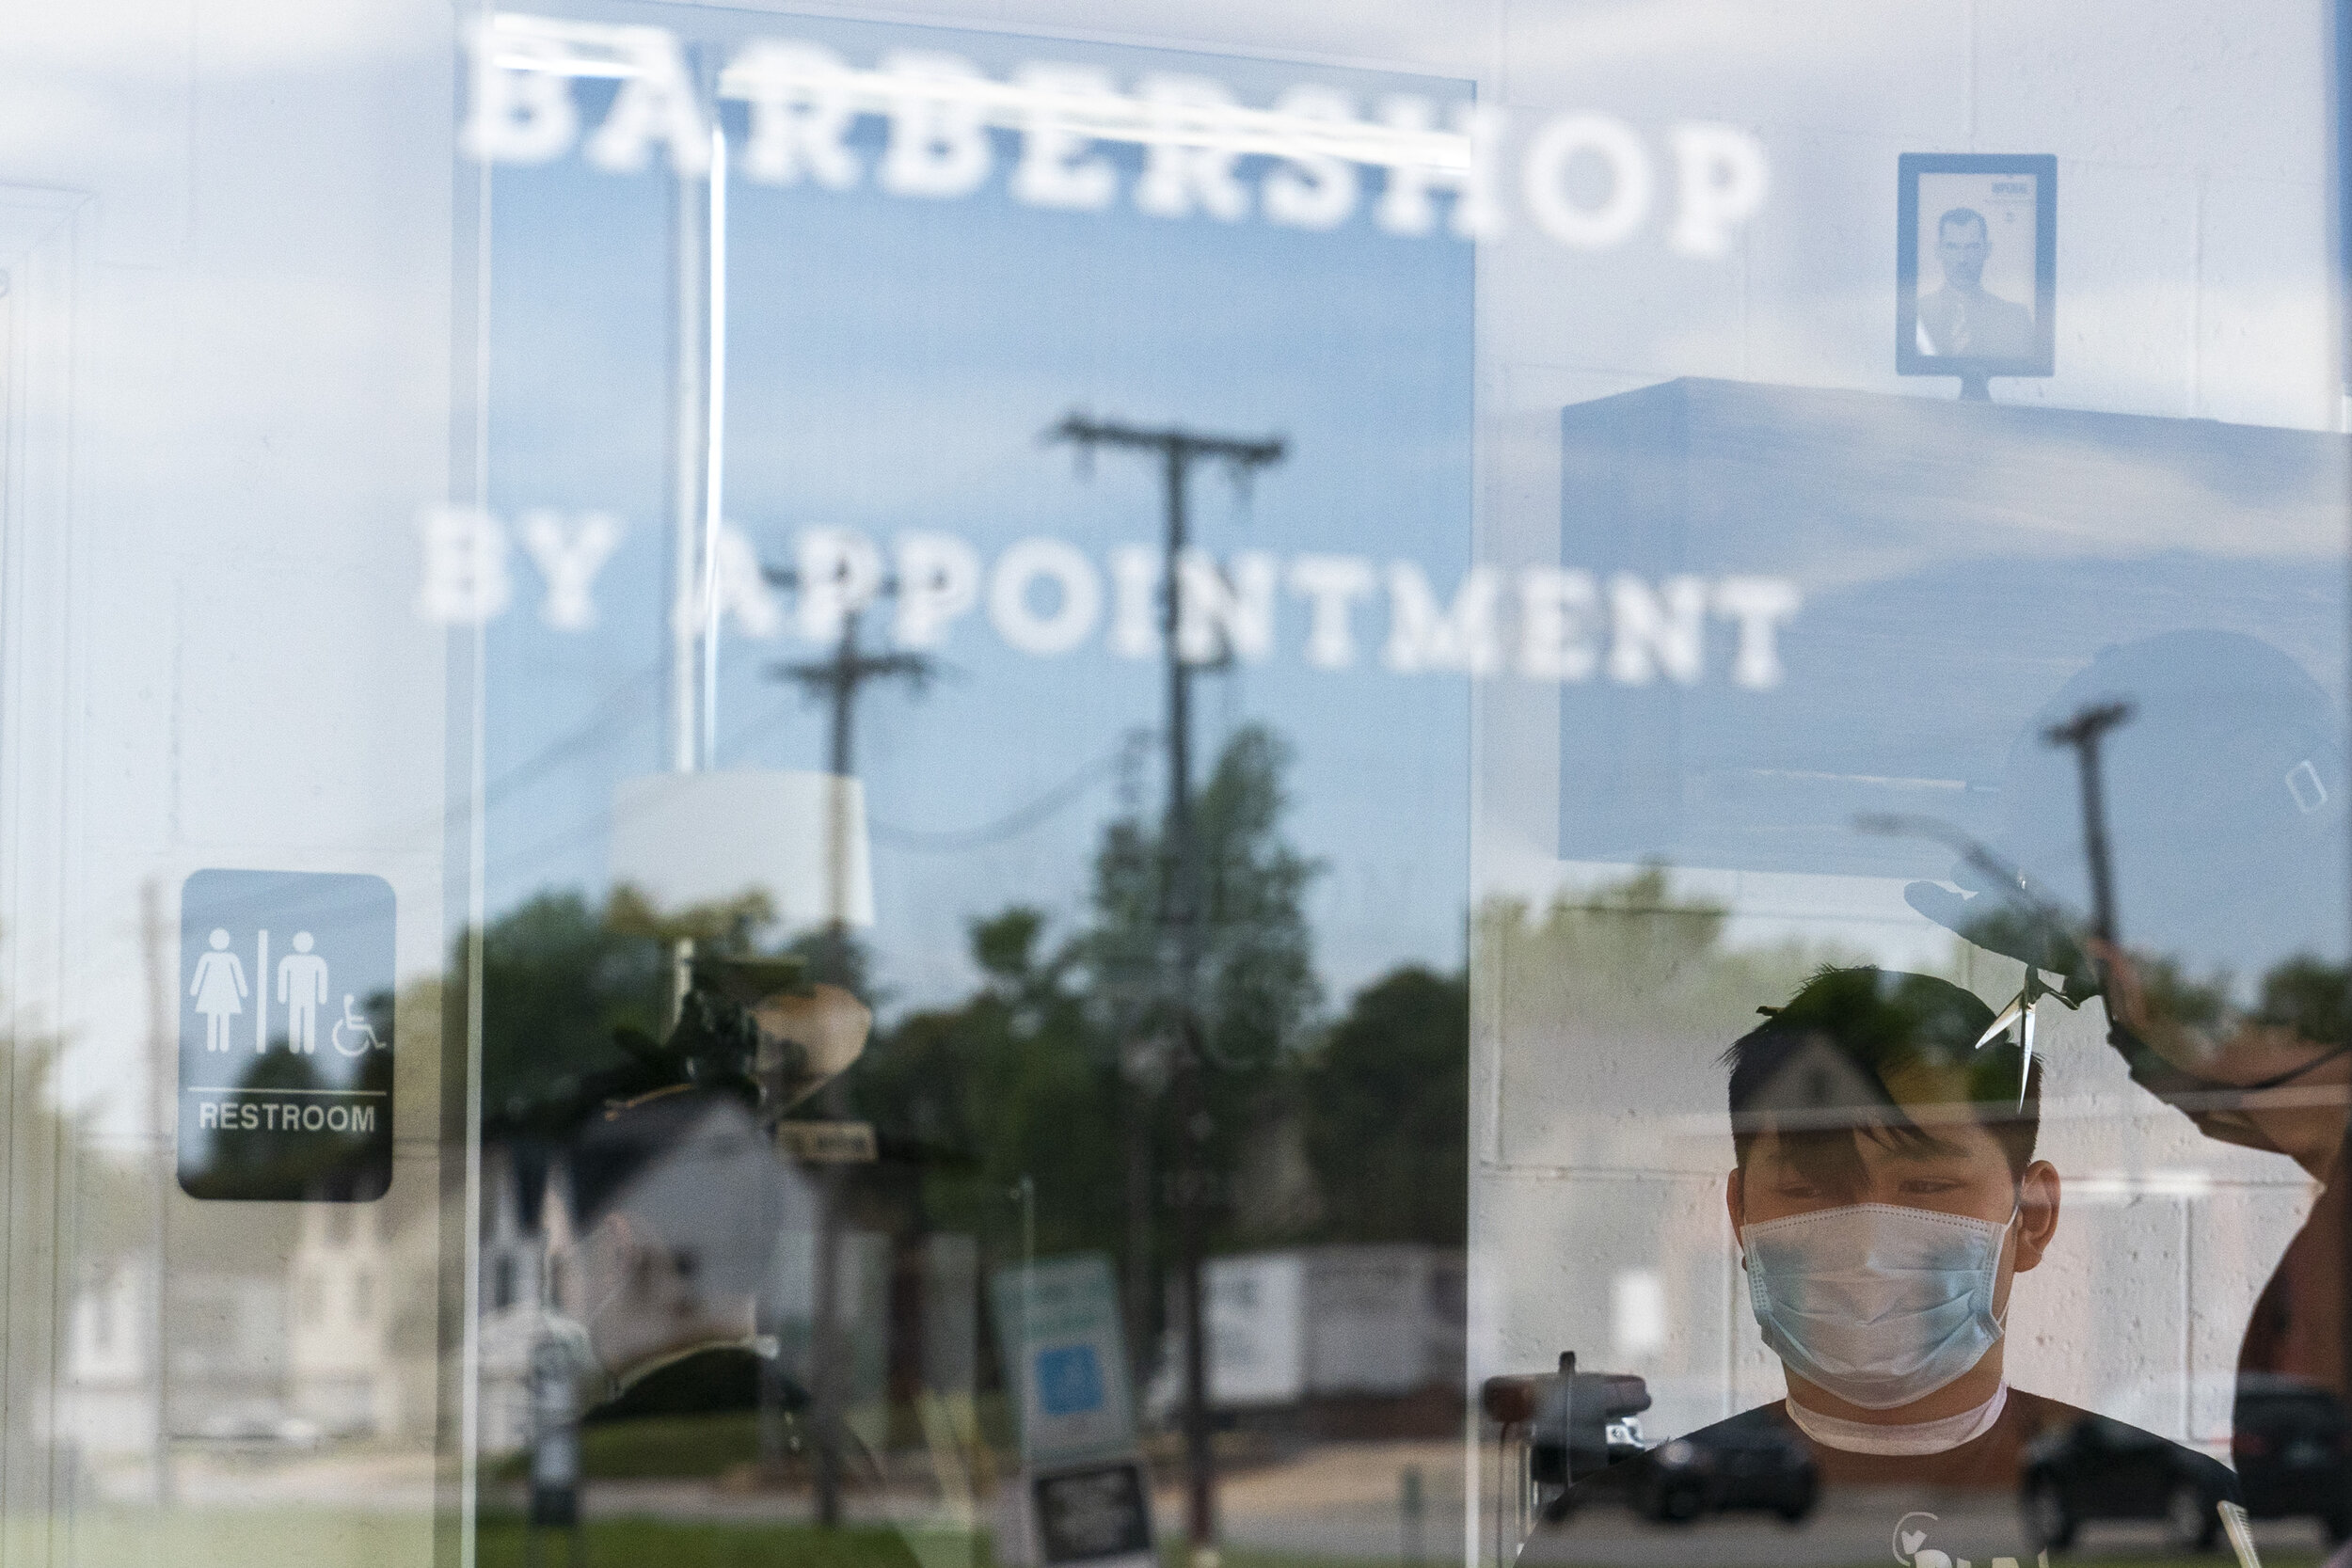  A man wearing a protective mask gets his hair cut at Weldon Jack barbershop in Oklahoma City, Oklahoma, U.S., on Friday, May 1, 2020. Oklahoma's Republican Governor Kevin Stitt did not issue a formal stay-at-home order during the coronavirus pandemi